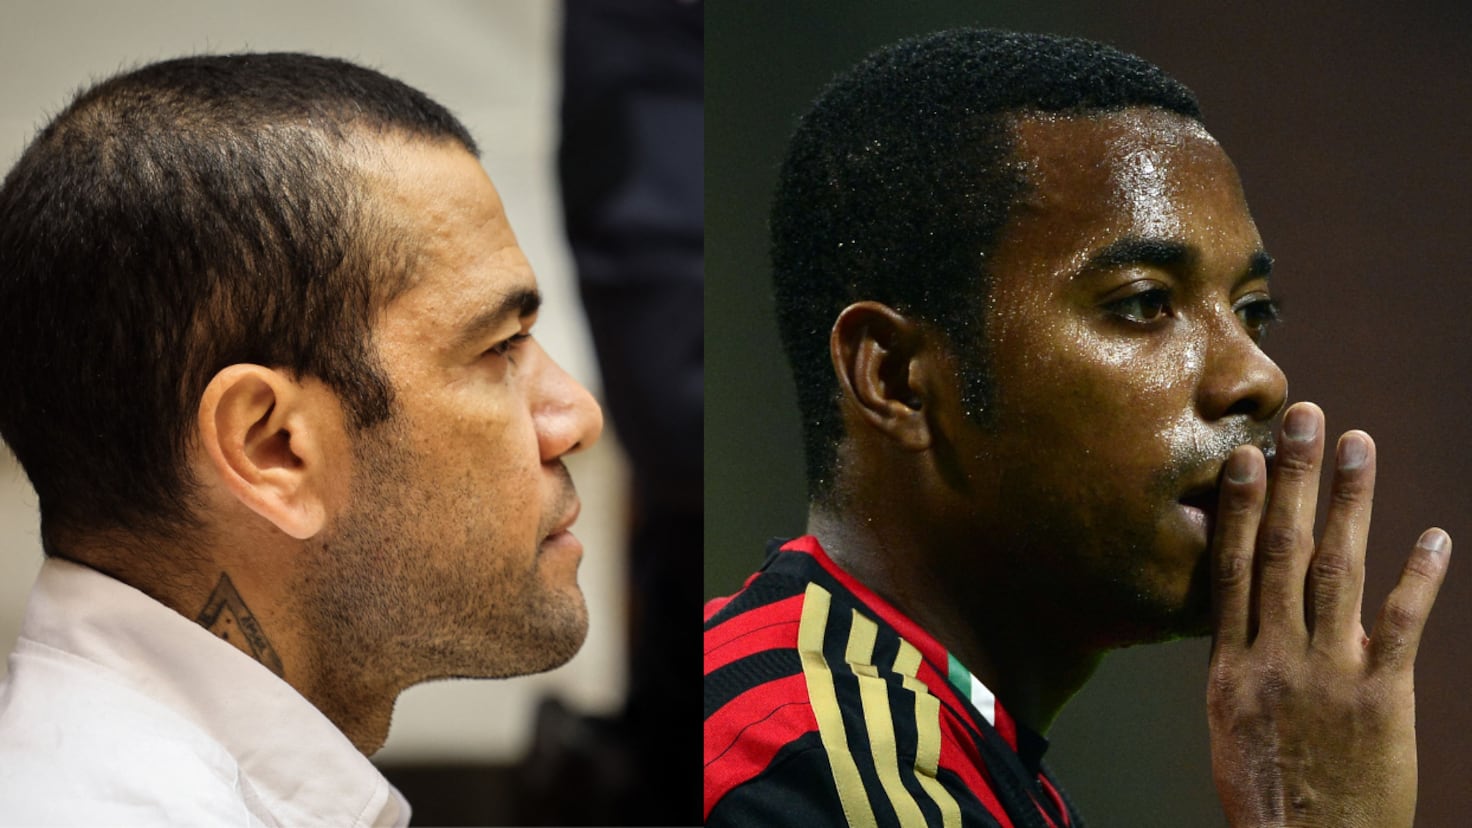 The CBF statement against Alves and Robinho: It is shameful and disastrous
